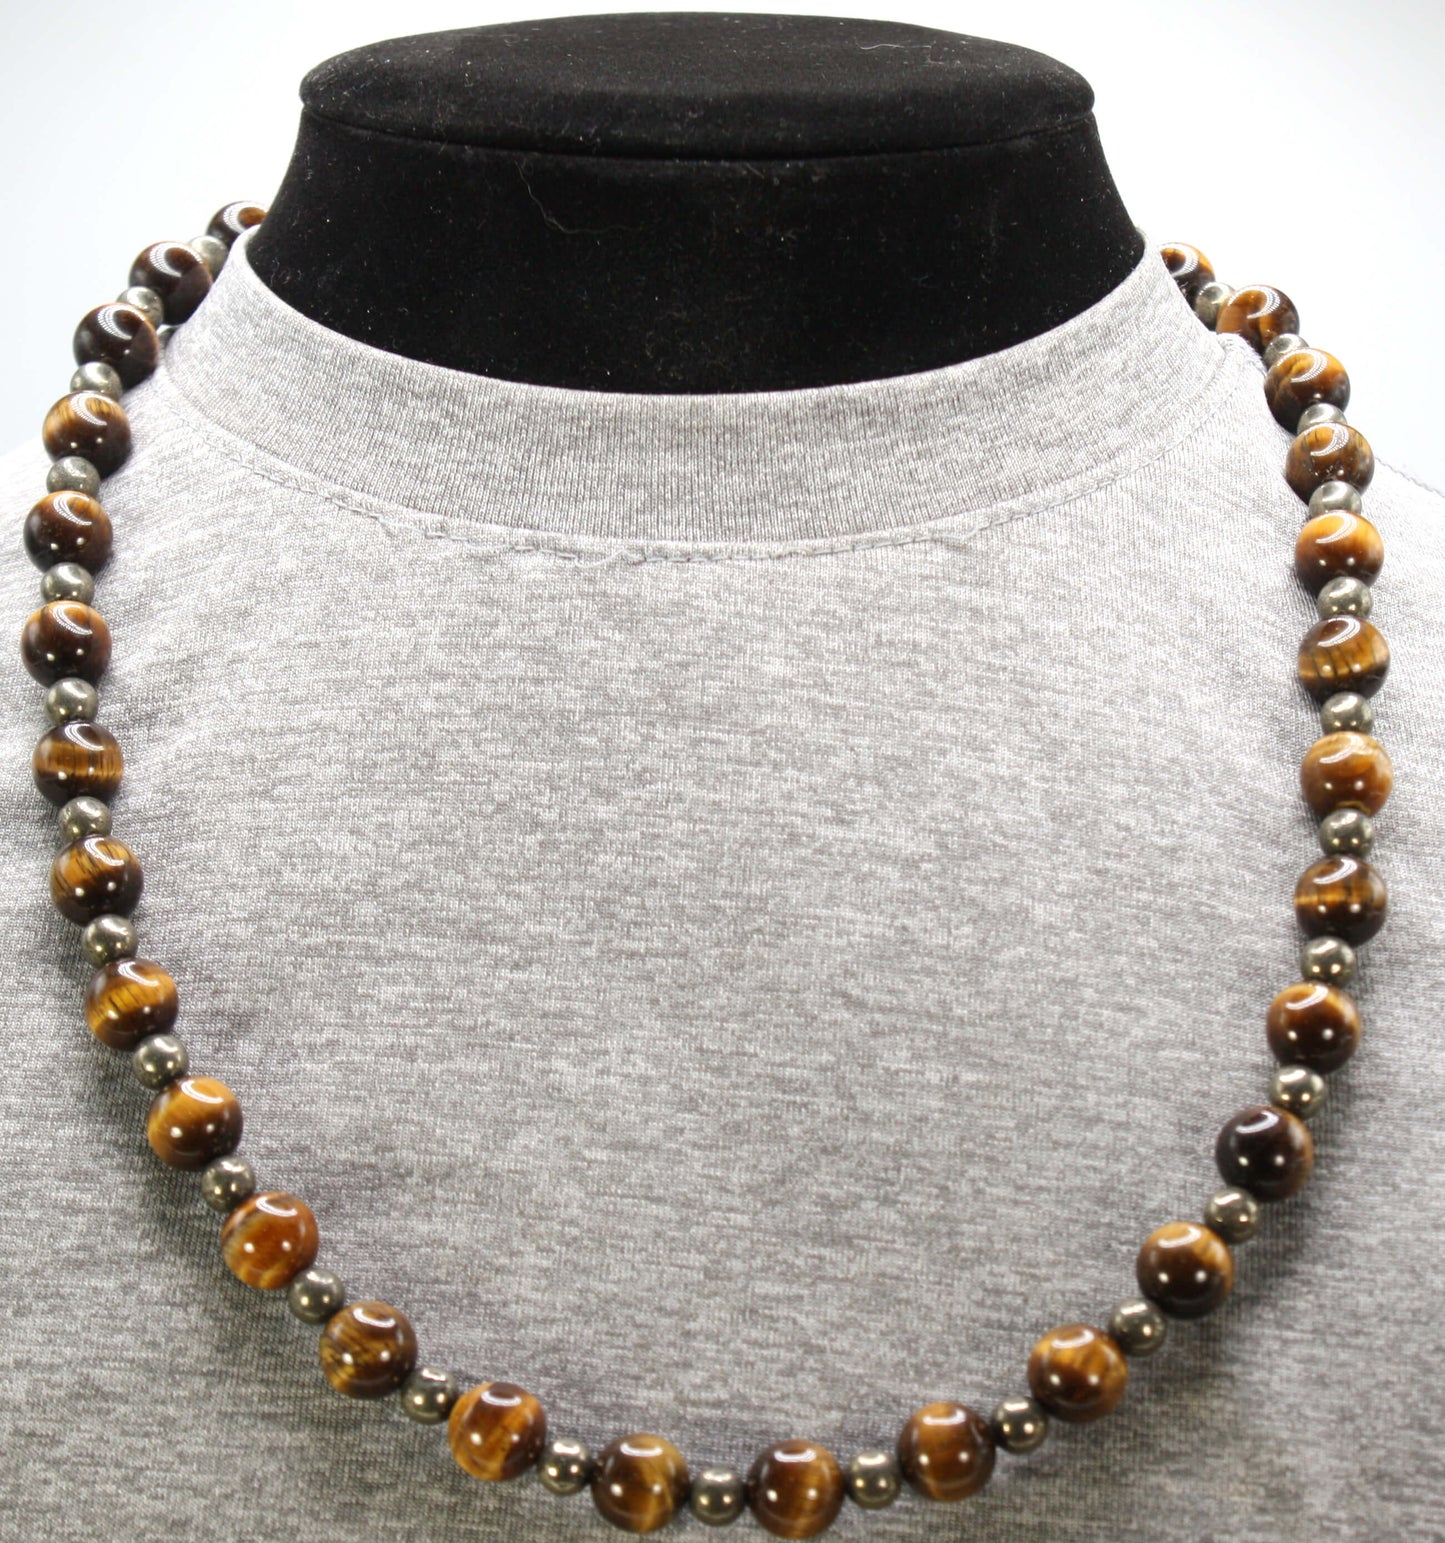 Genuine Tiger Eye and Pyrite Necklace - Gift for Men/Women - 10mm and 6mm Beaded Necklace